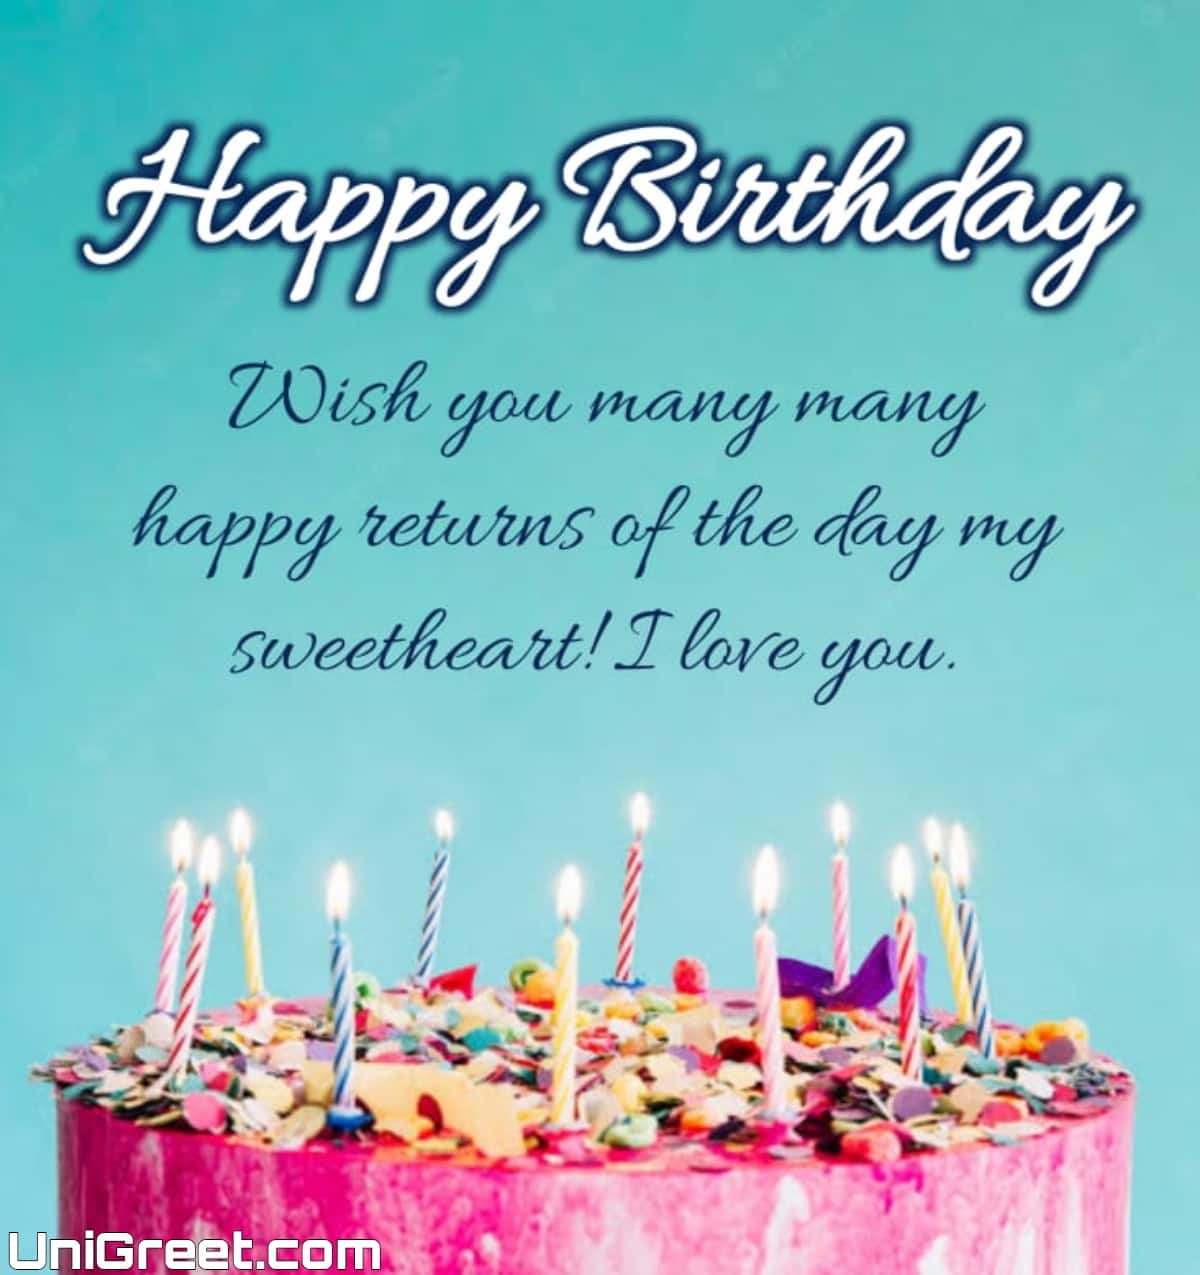 50 Romantic Happy Birthday Wishes Images For Him / Husband / Boyfriend